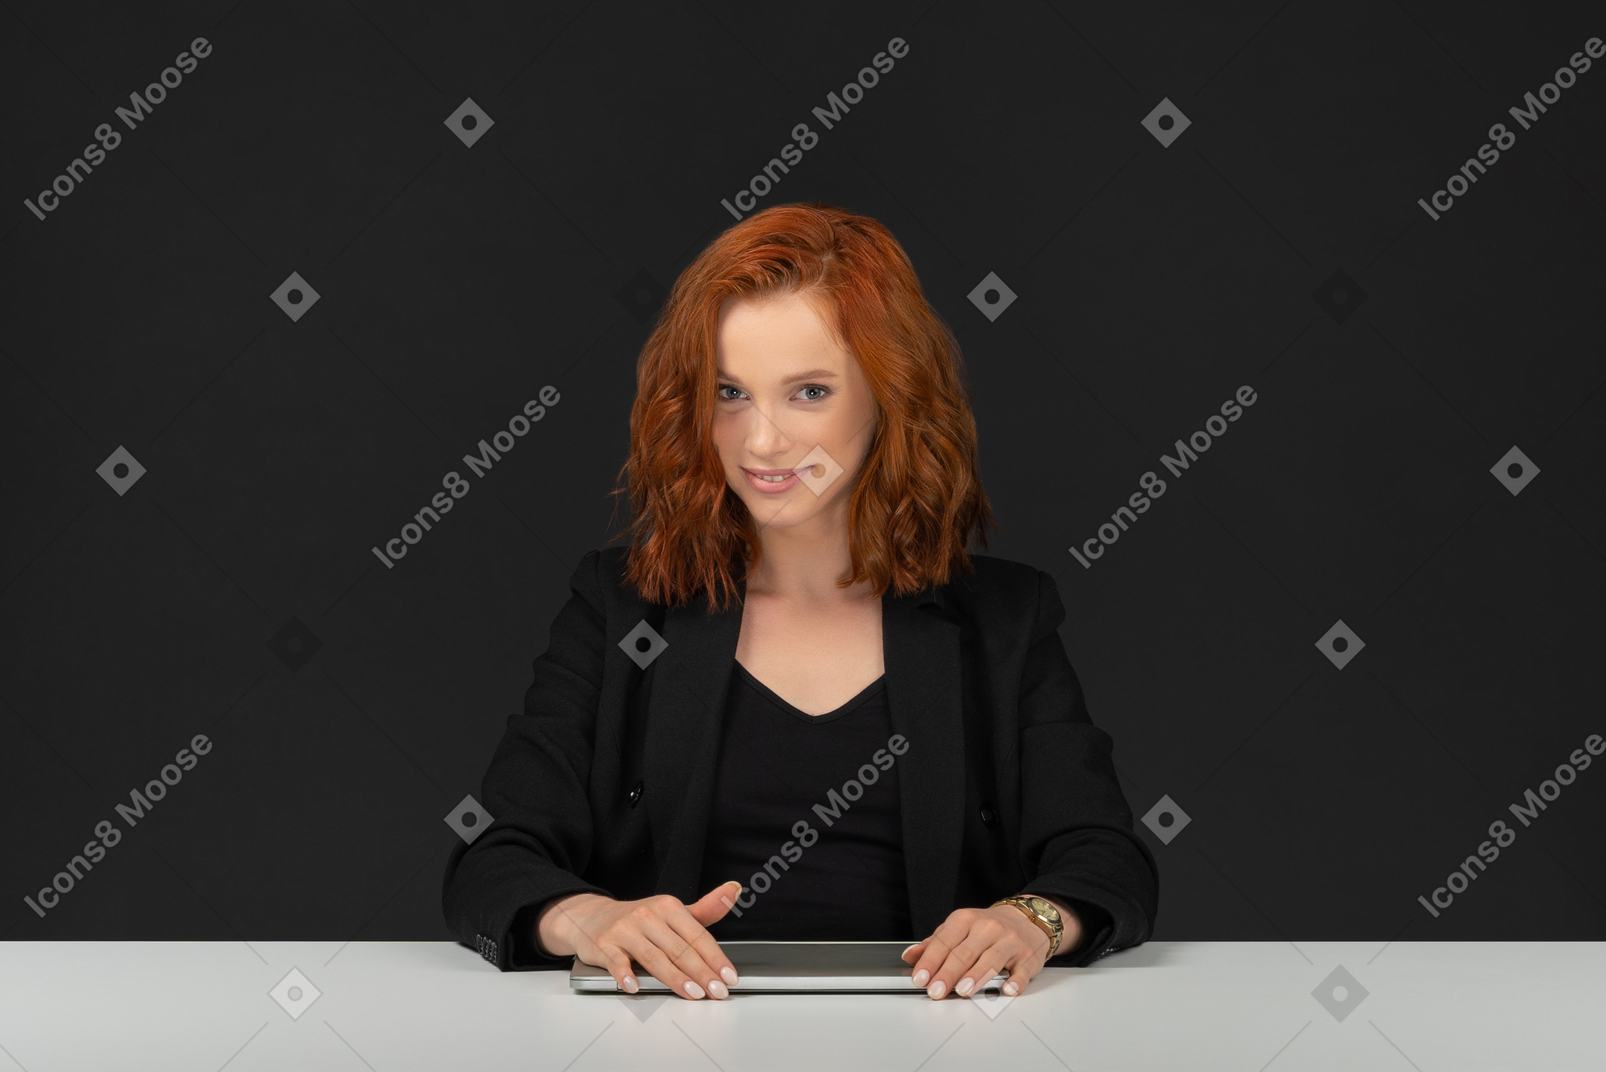 Cute young woman sitting at the table and smiling